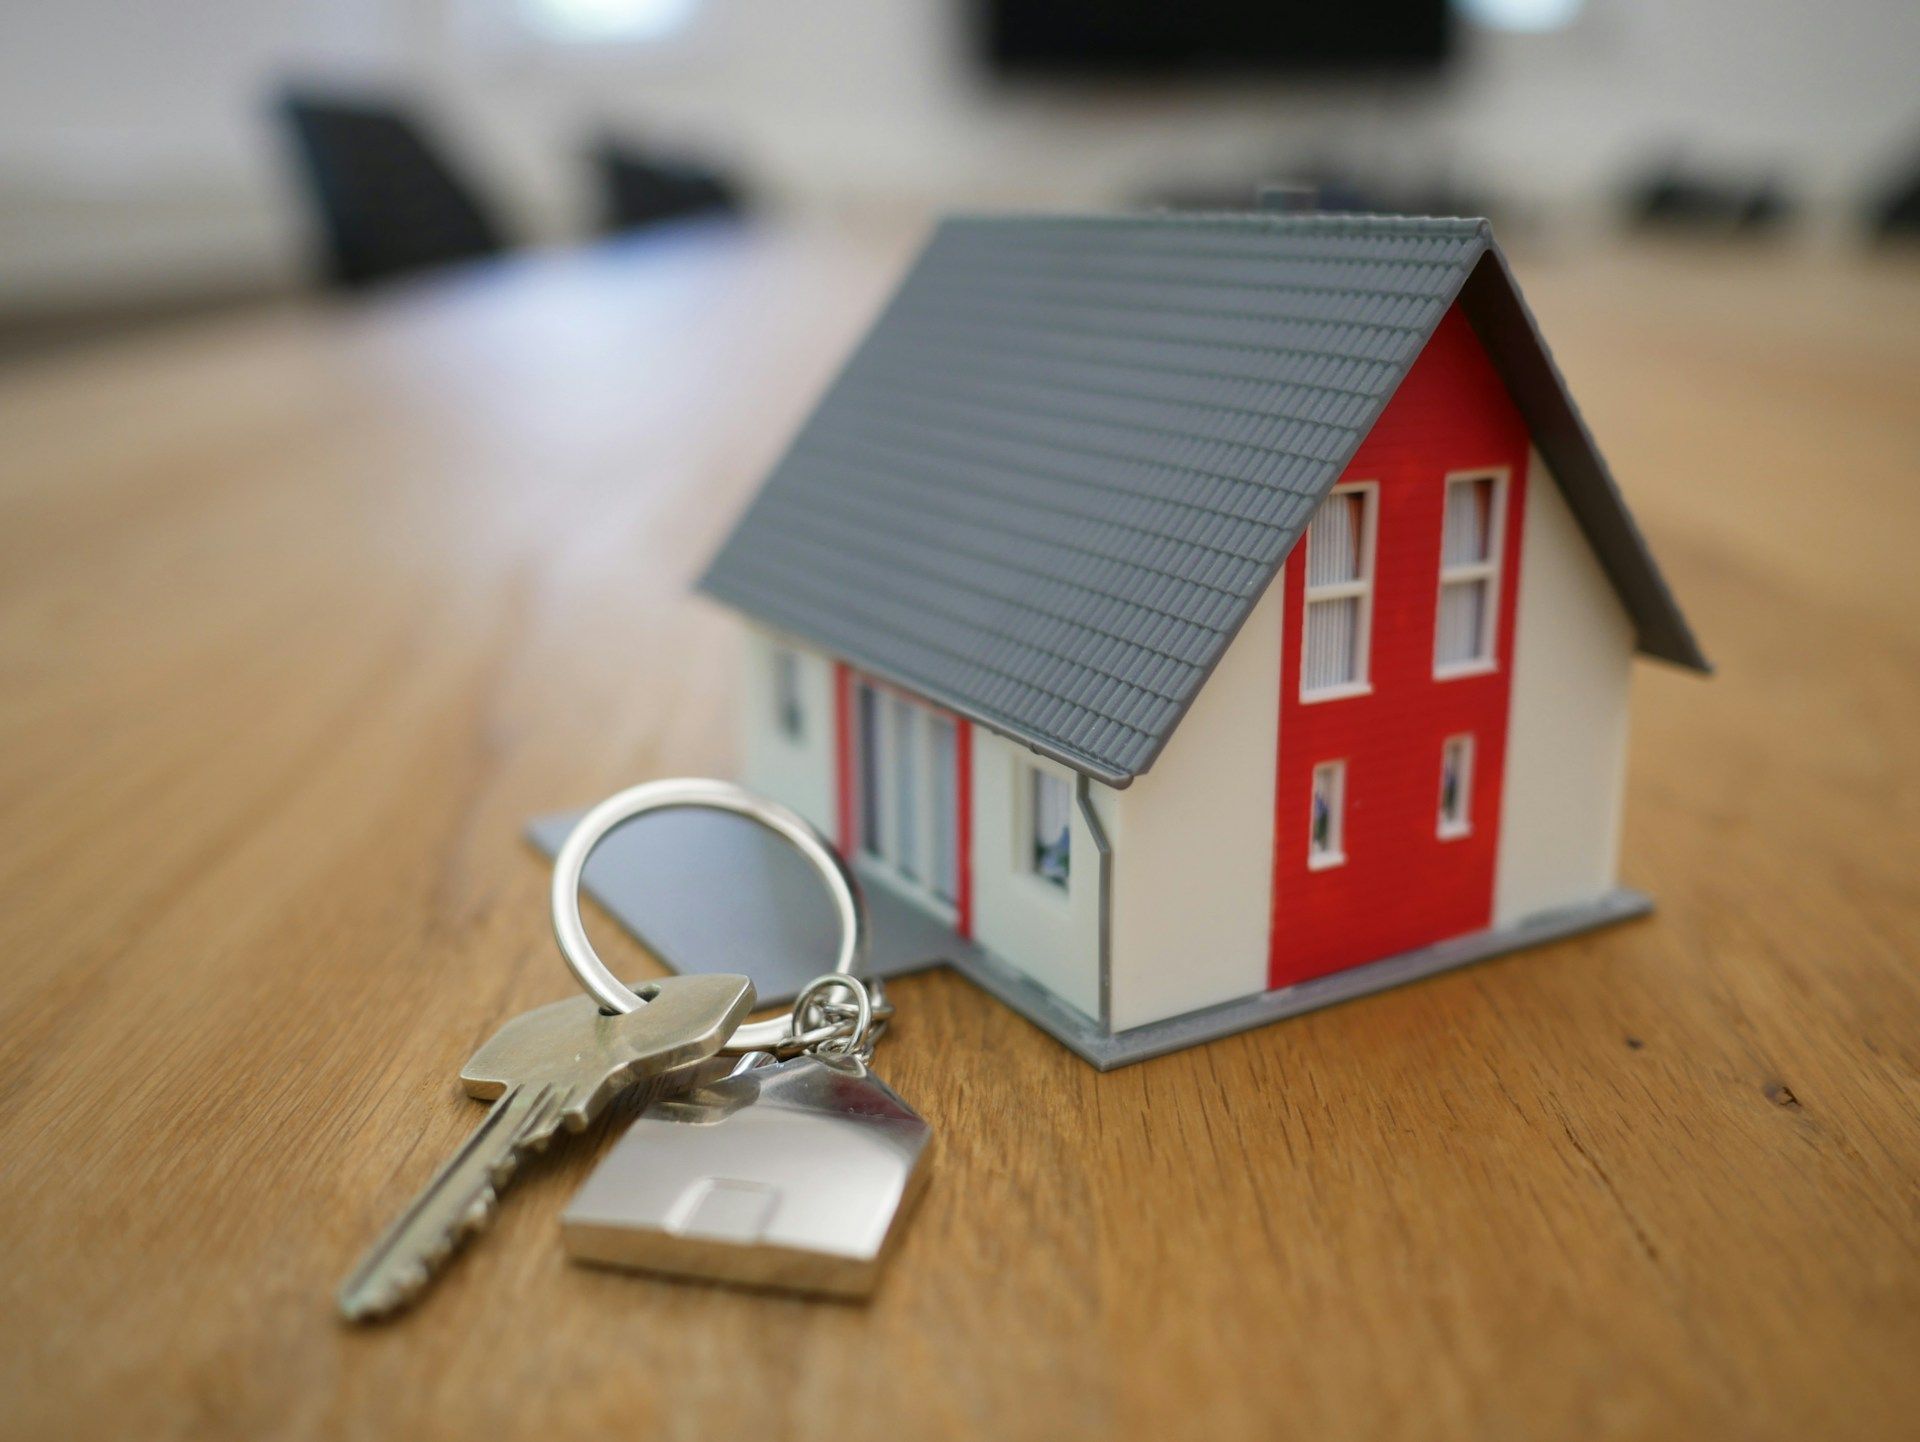 A set of house keys next to a red and white toy model of a house